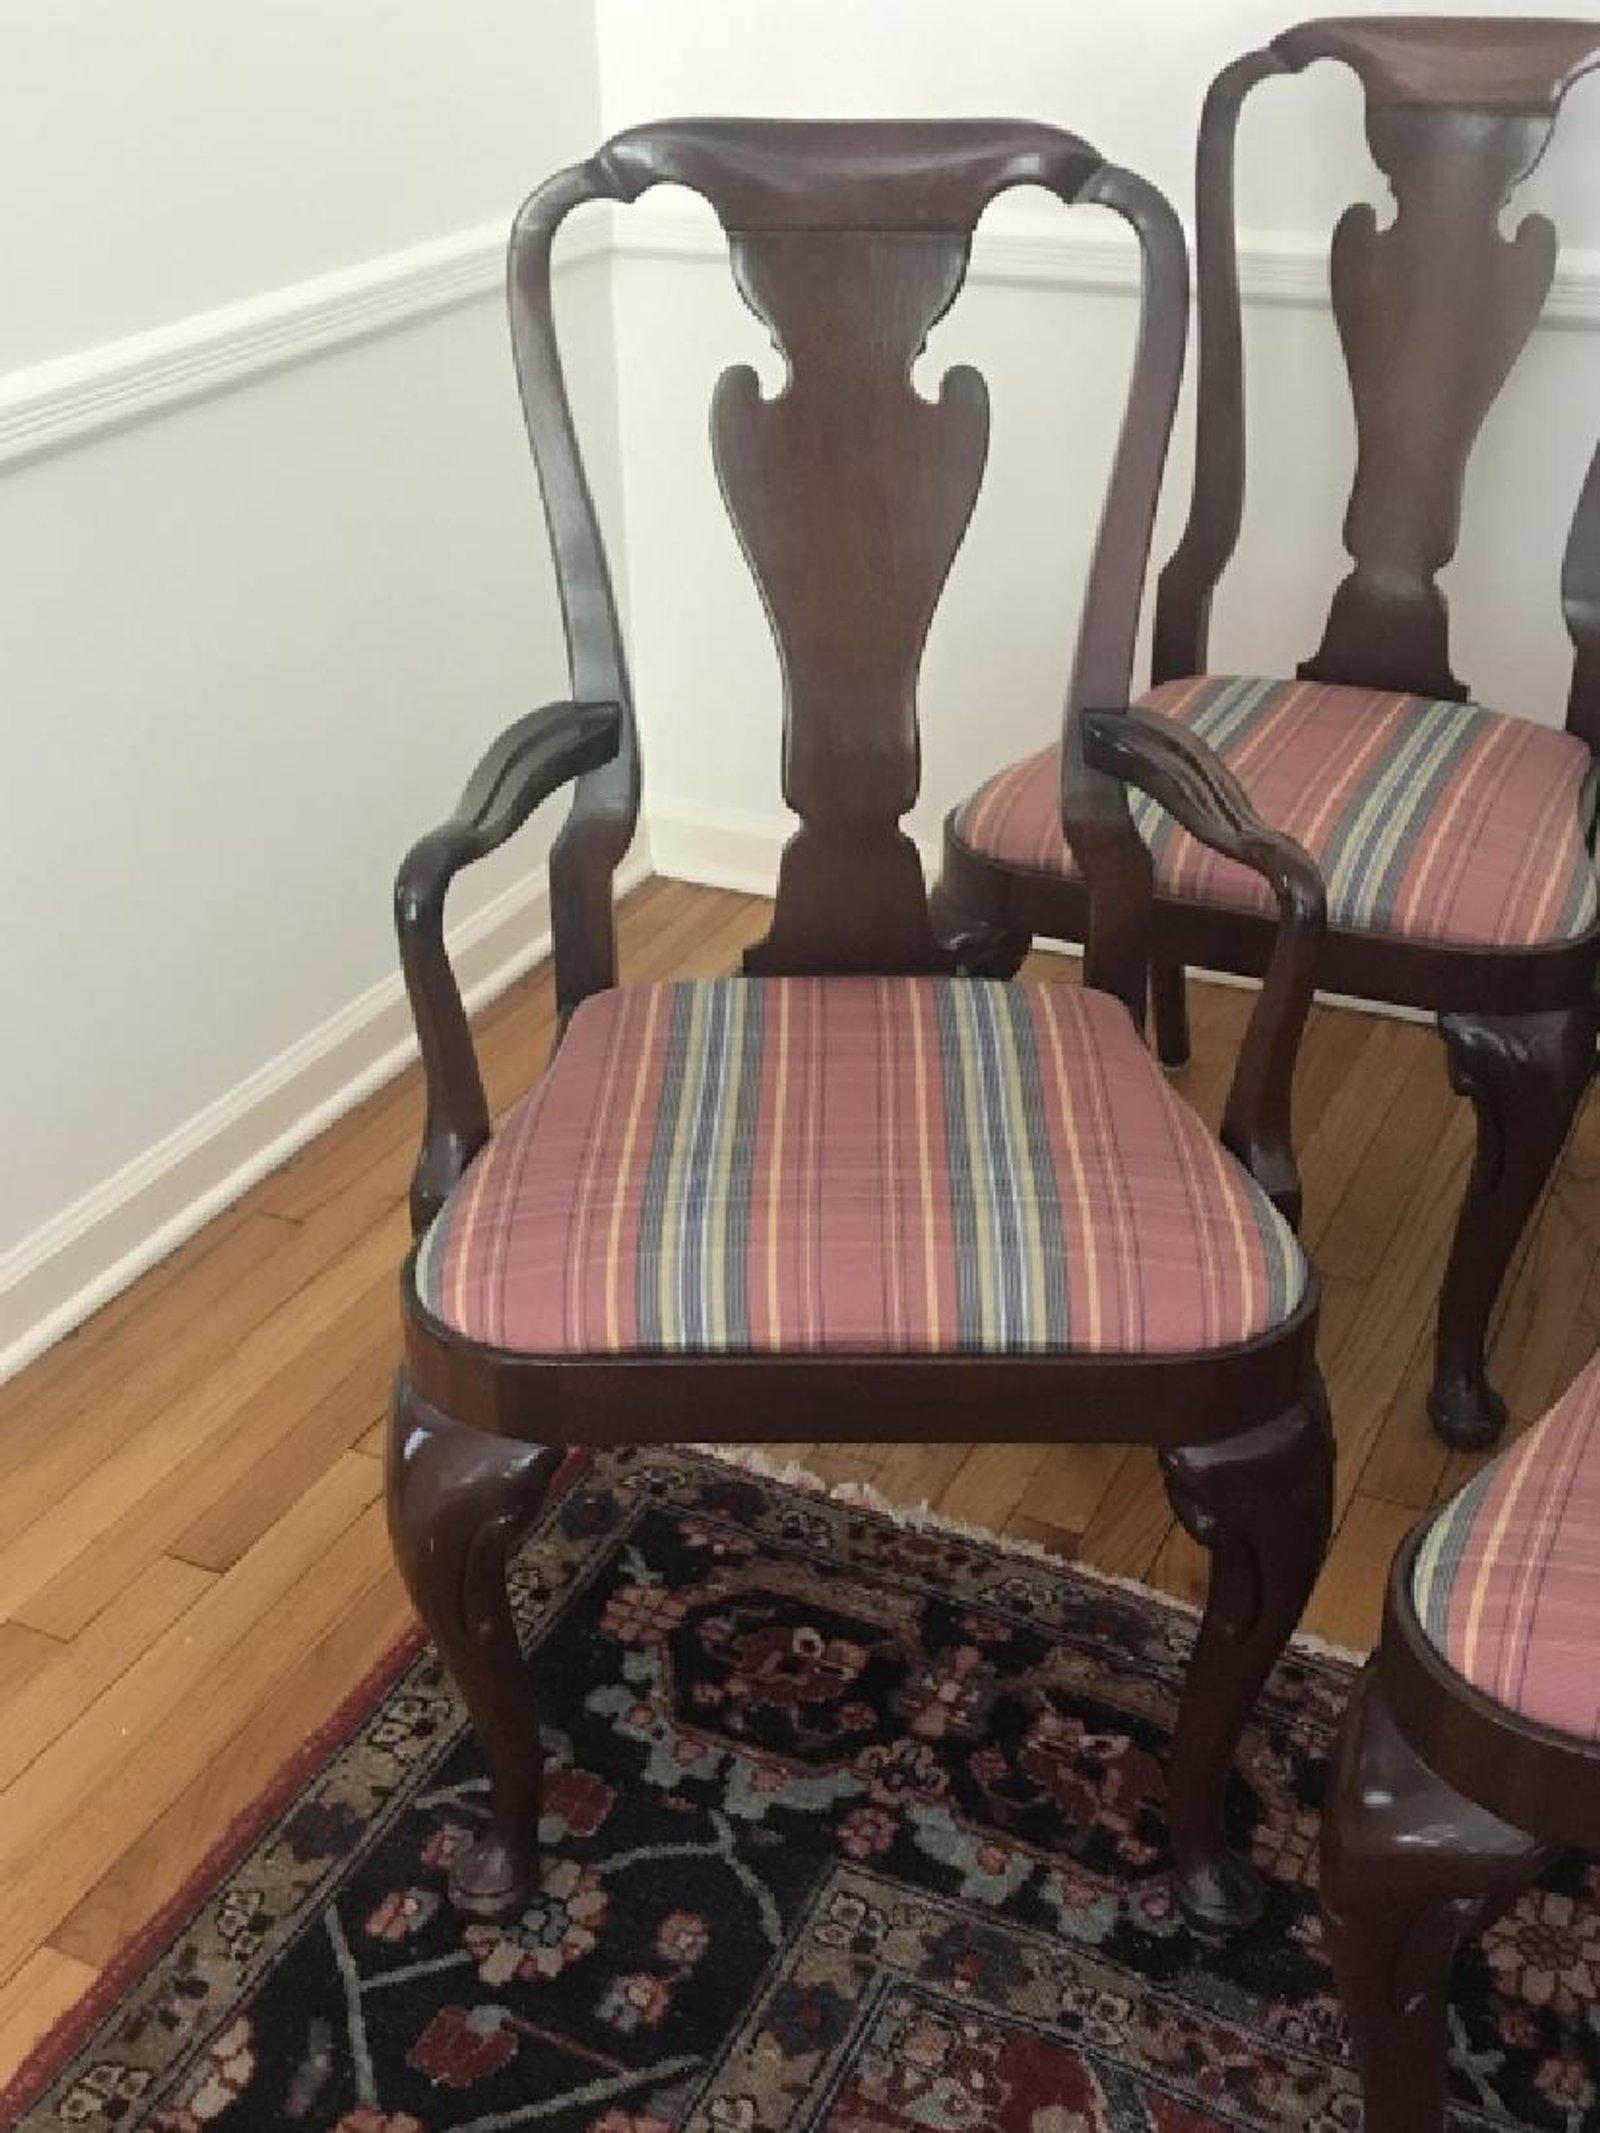 Set of solid mahogany Queen Anne dining chairs made in the 20th century by Baker Furniture. Excellent condition and finish, great size, sturdy, good medium mahogany color. Two armchairs and six sides.